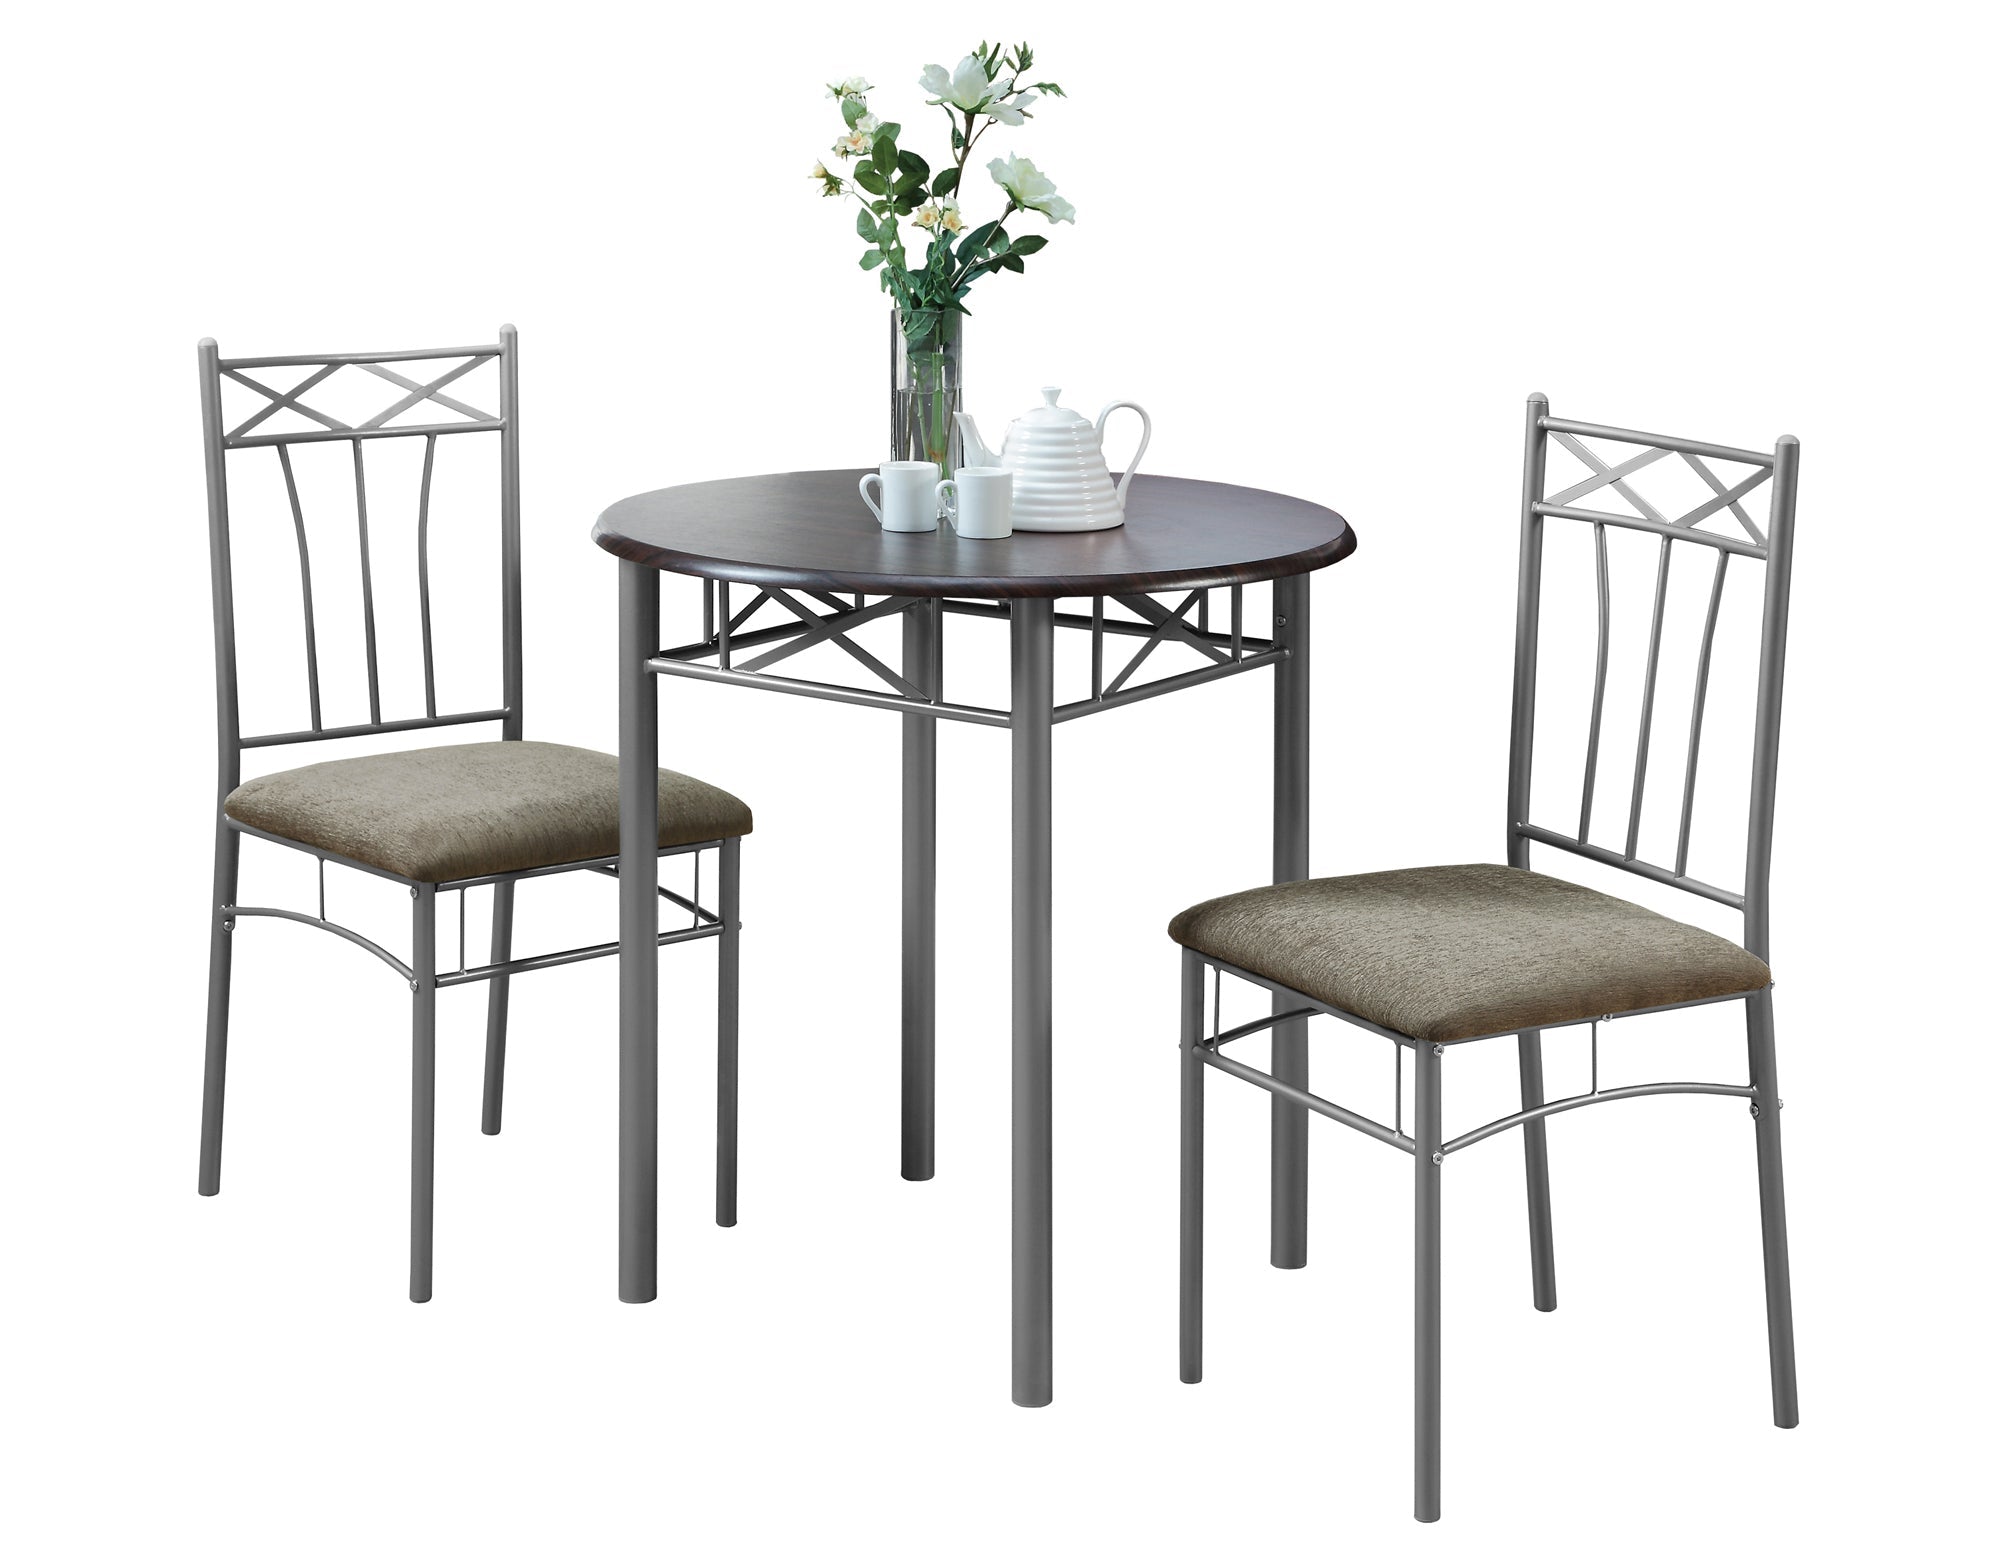 64" X 64" X 102" Cappuccinowithsilver Metal 3Pcs Dining Set - Tuesday Morning-Dining Sets